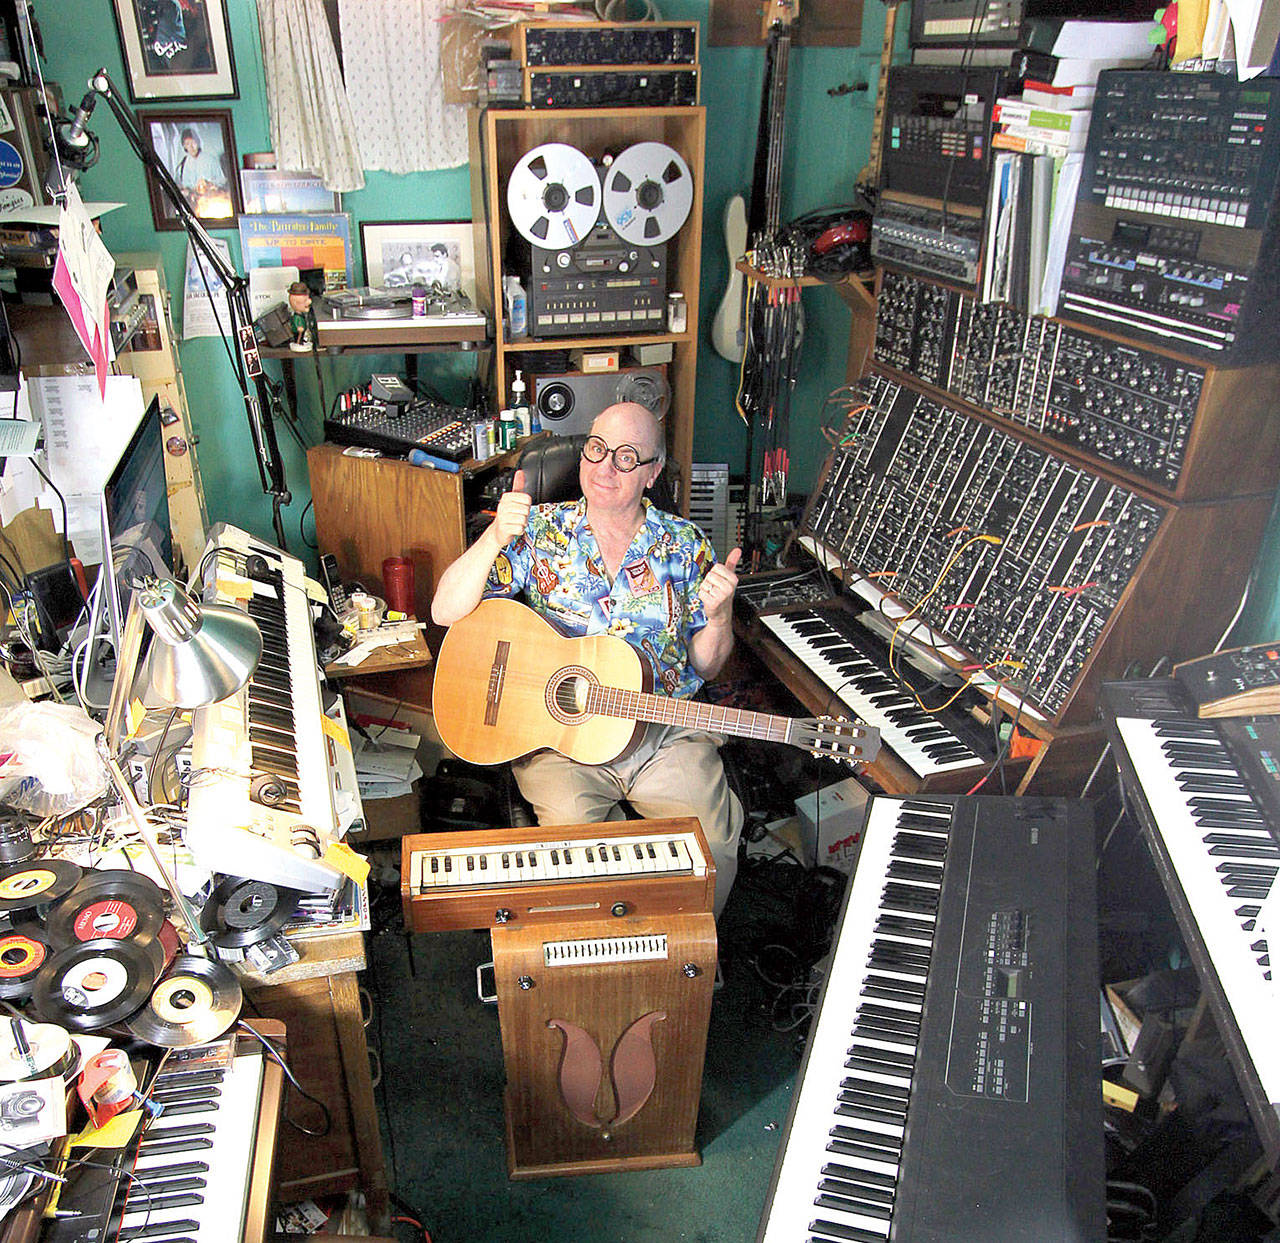 Everett singer-songwriter Dana Countryman records out of his home studio off Colby Avenue. (Dana Countryman)